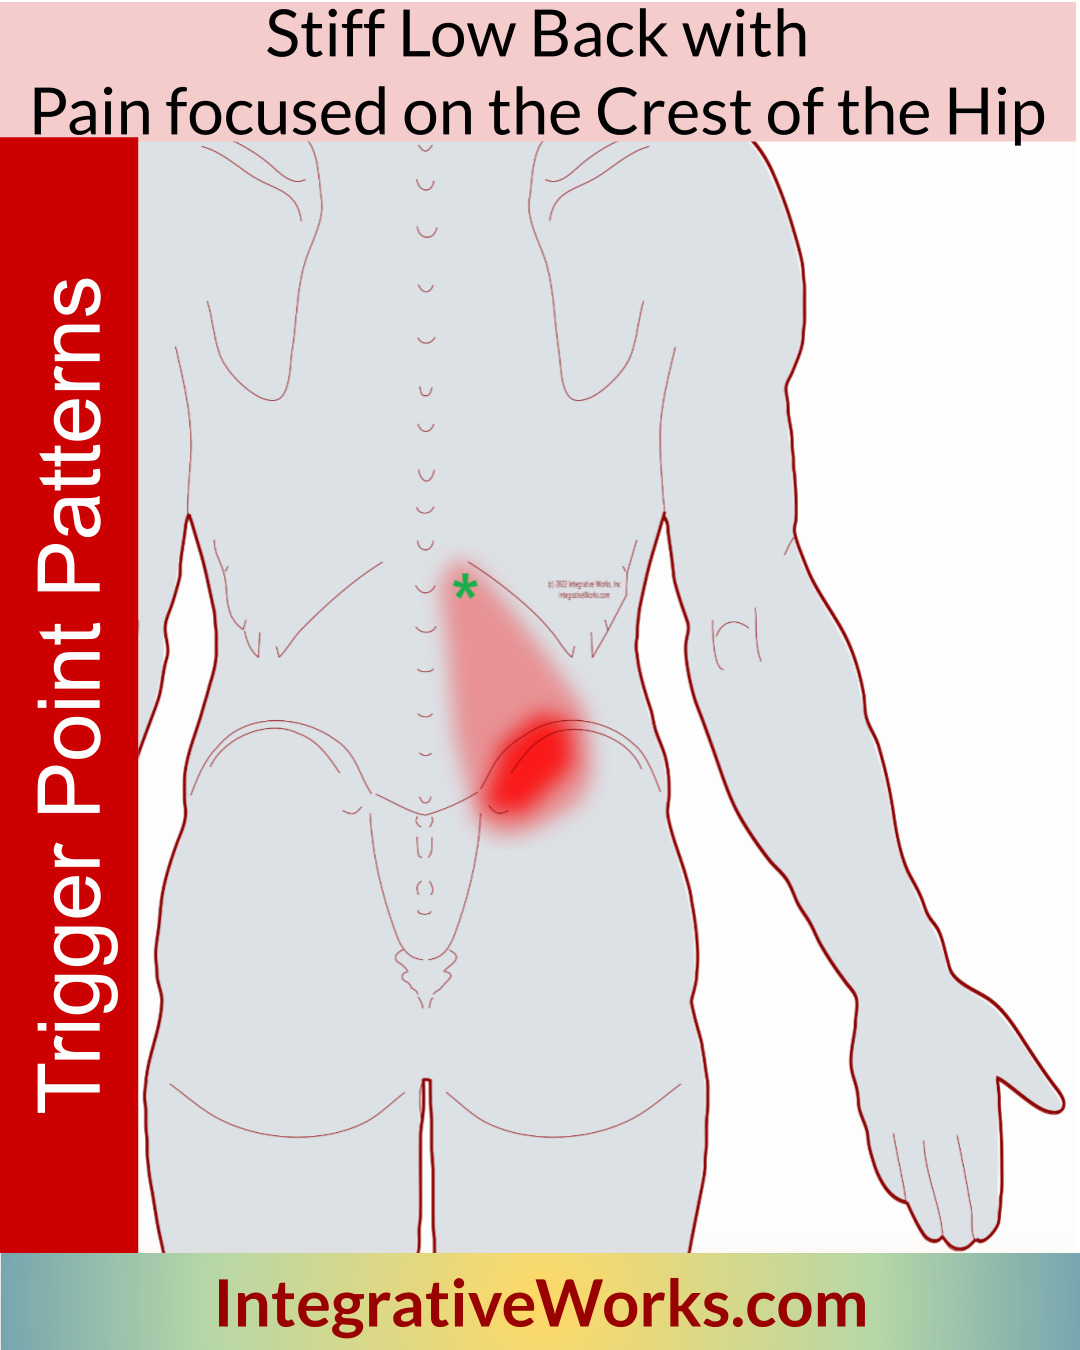 Stiff Low Back Pain to the Crest of the Hip